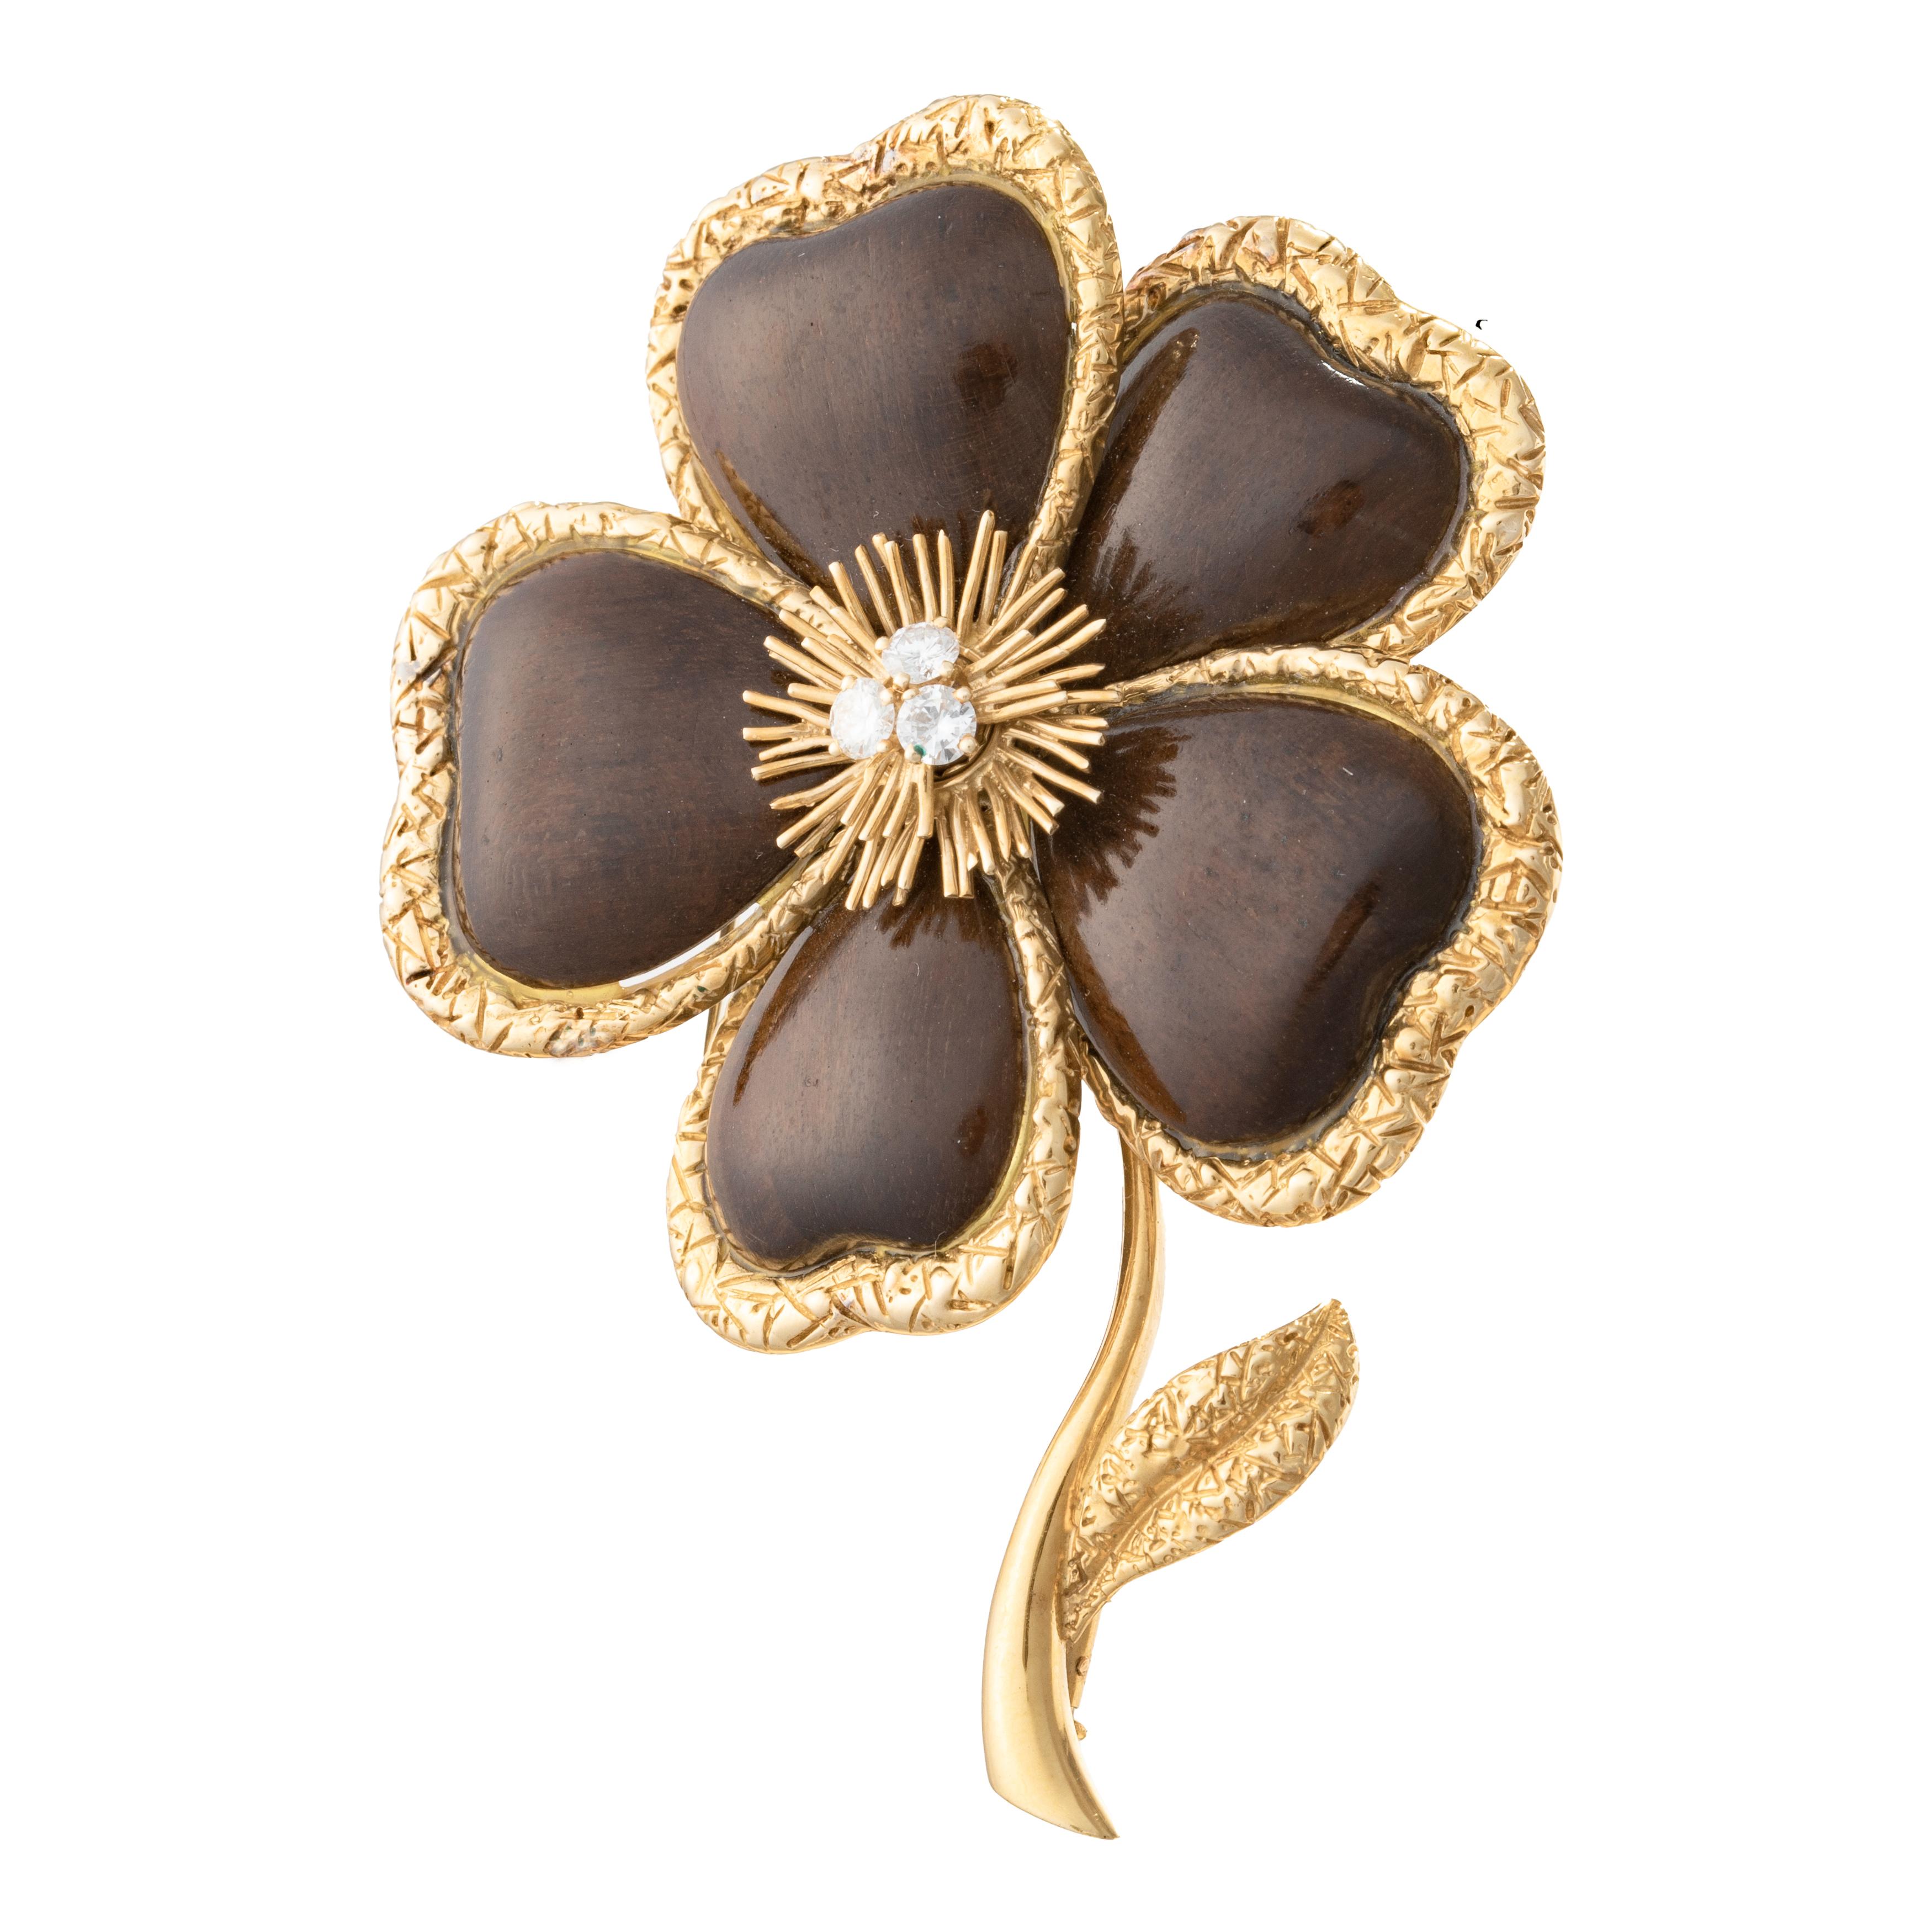 Van Cleef & Arpels large clematis flower brooch, the flowerhead centering three round brilliant-cut diamonds within a gold wire spray surrounded by five carved wood petals each within a hammered gold frame.  The flowerhead sprouting from a polished